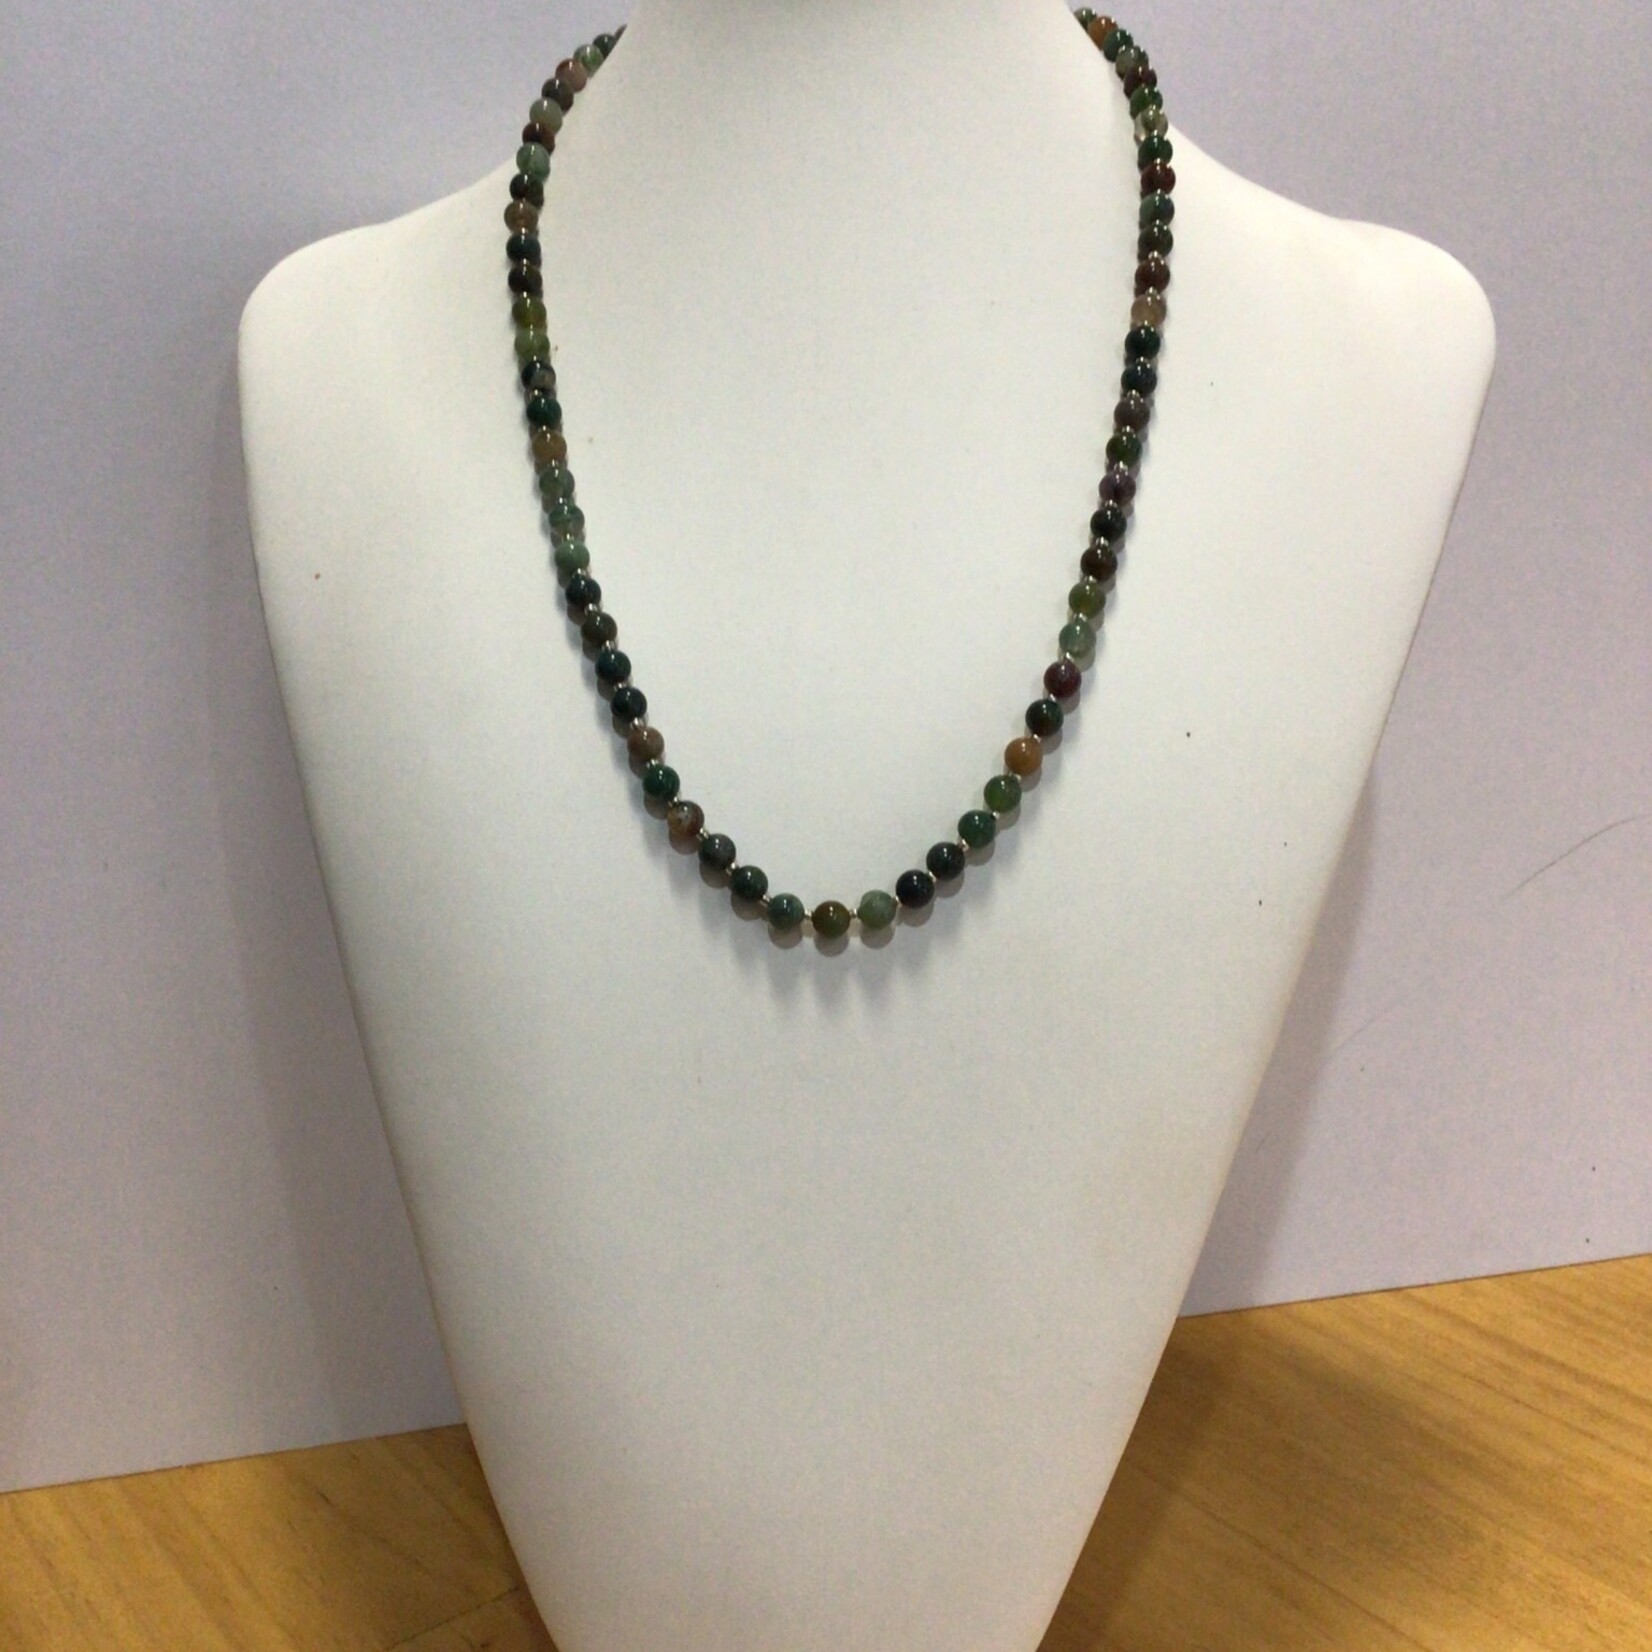 OPO Olive Green Shades Gemstone Necklace